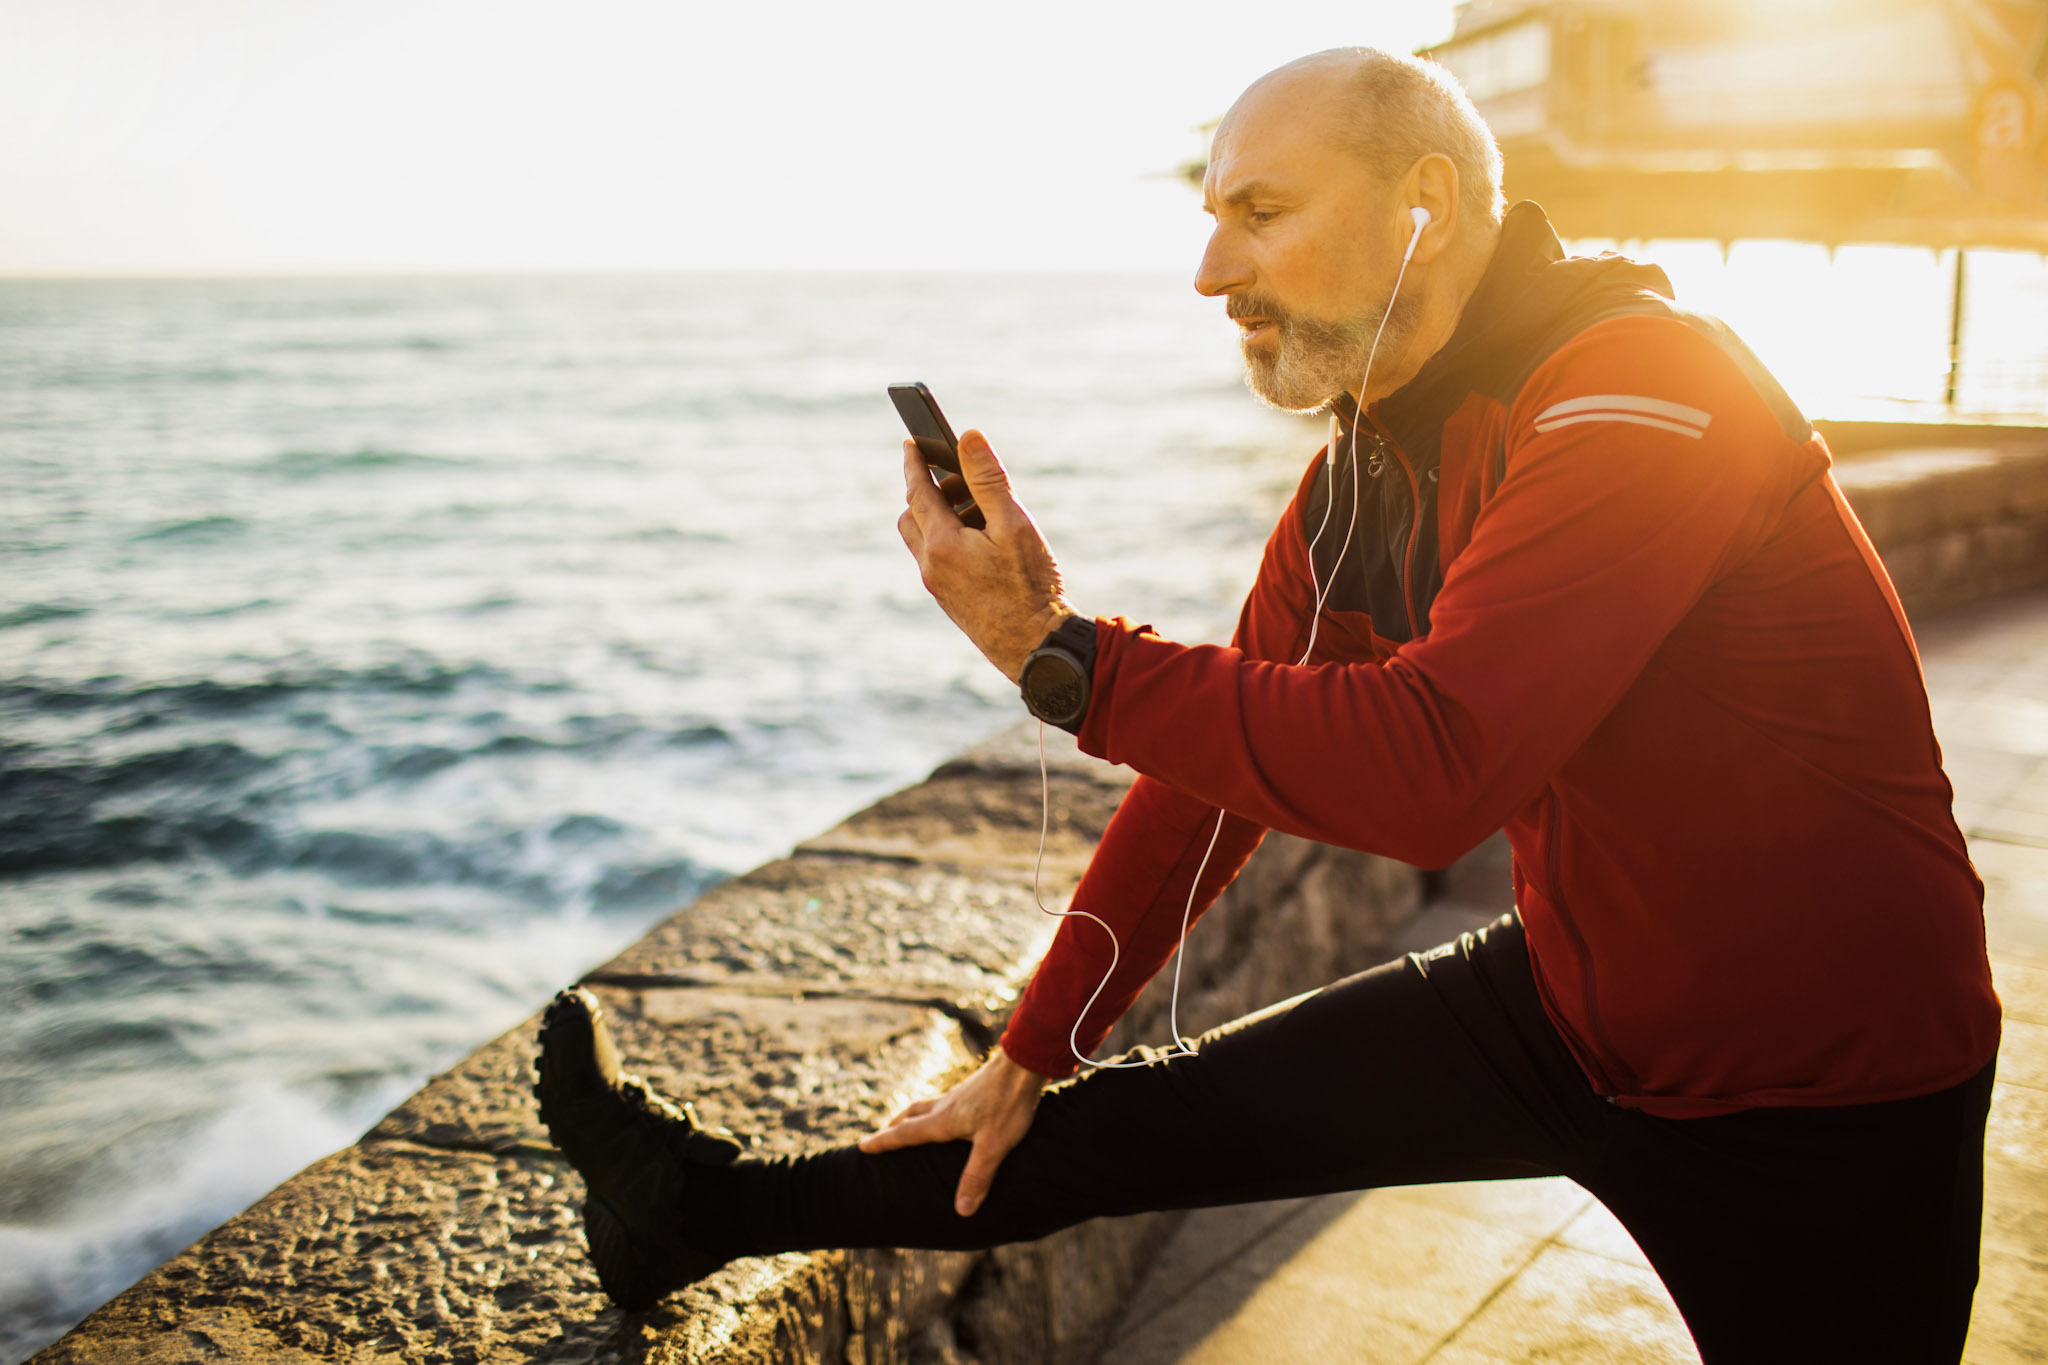 stock image of a man stretching outside while also using a smartphone